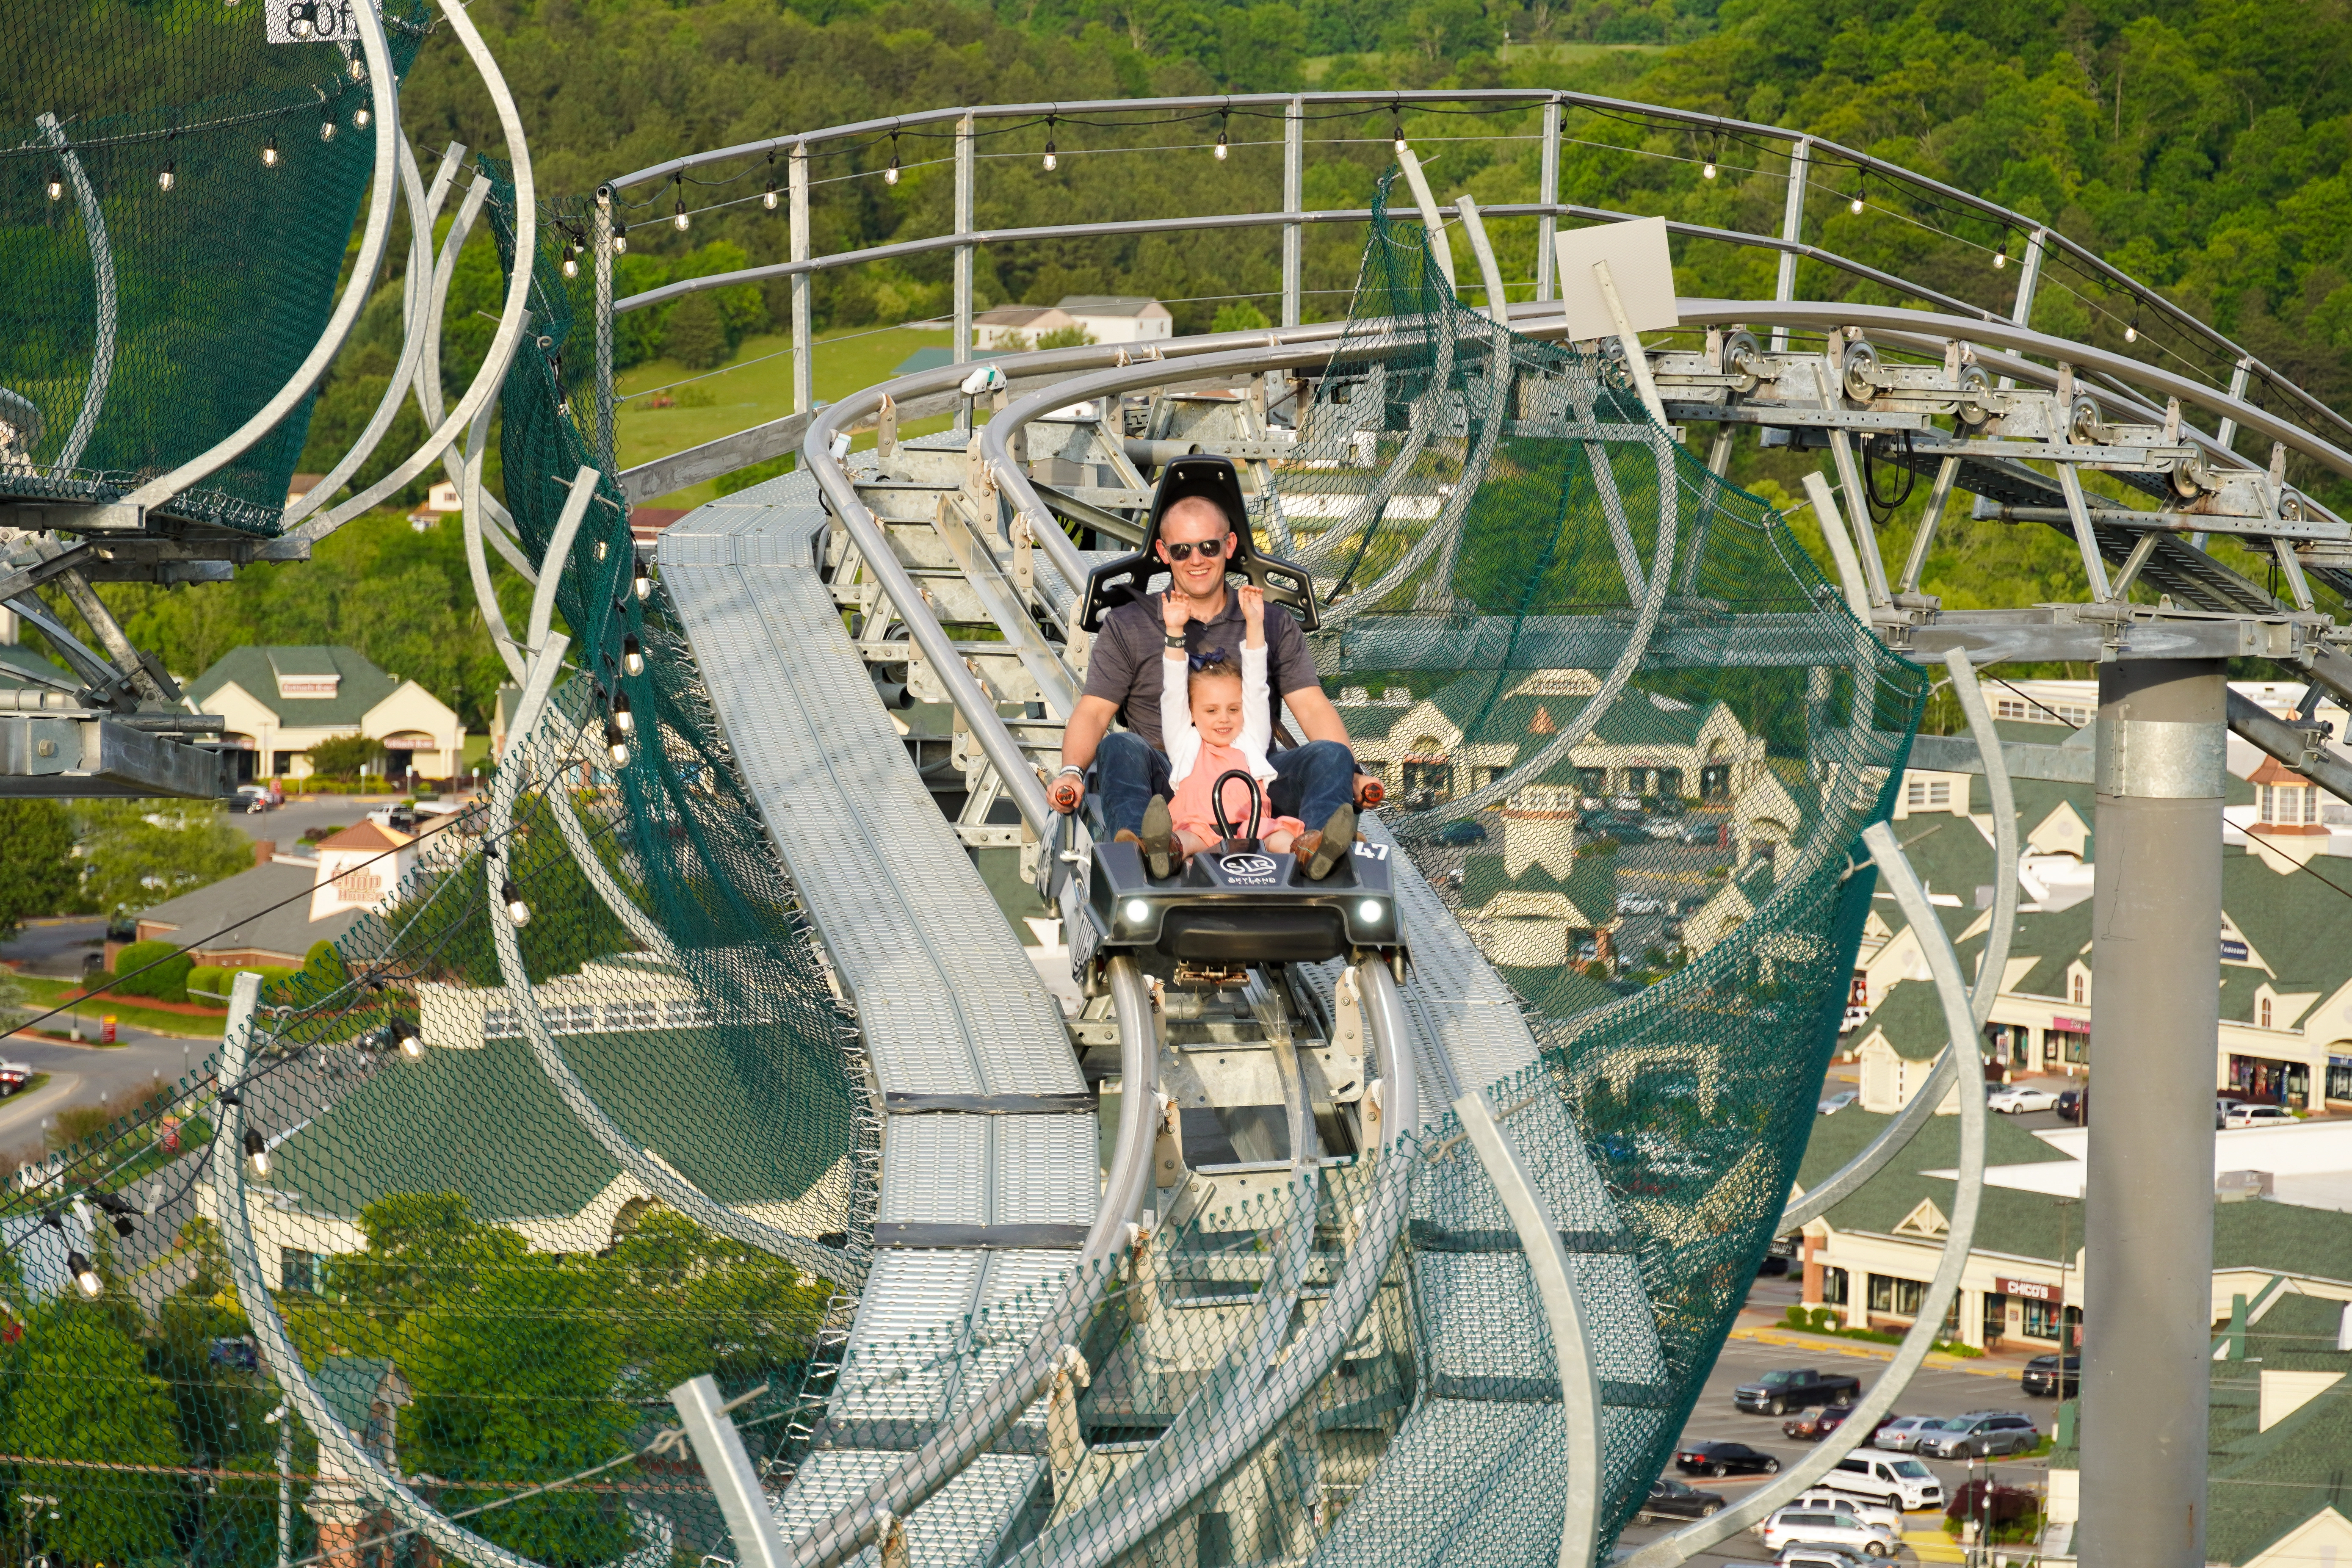 father and daughter riding the wild stallion mountain coaster